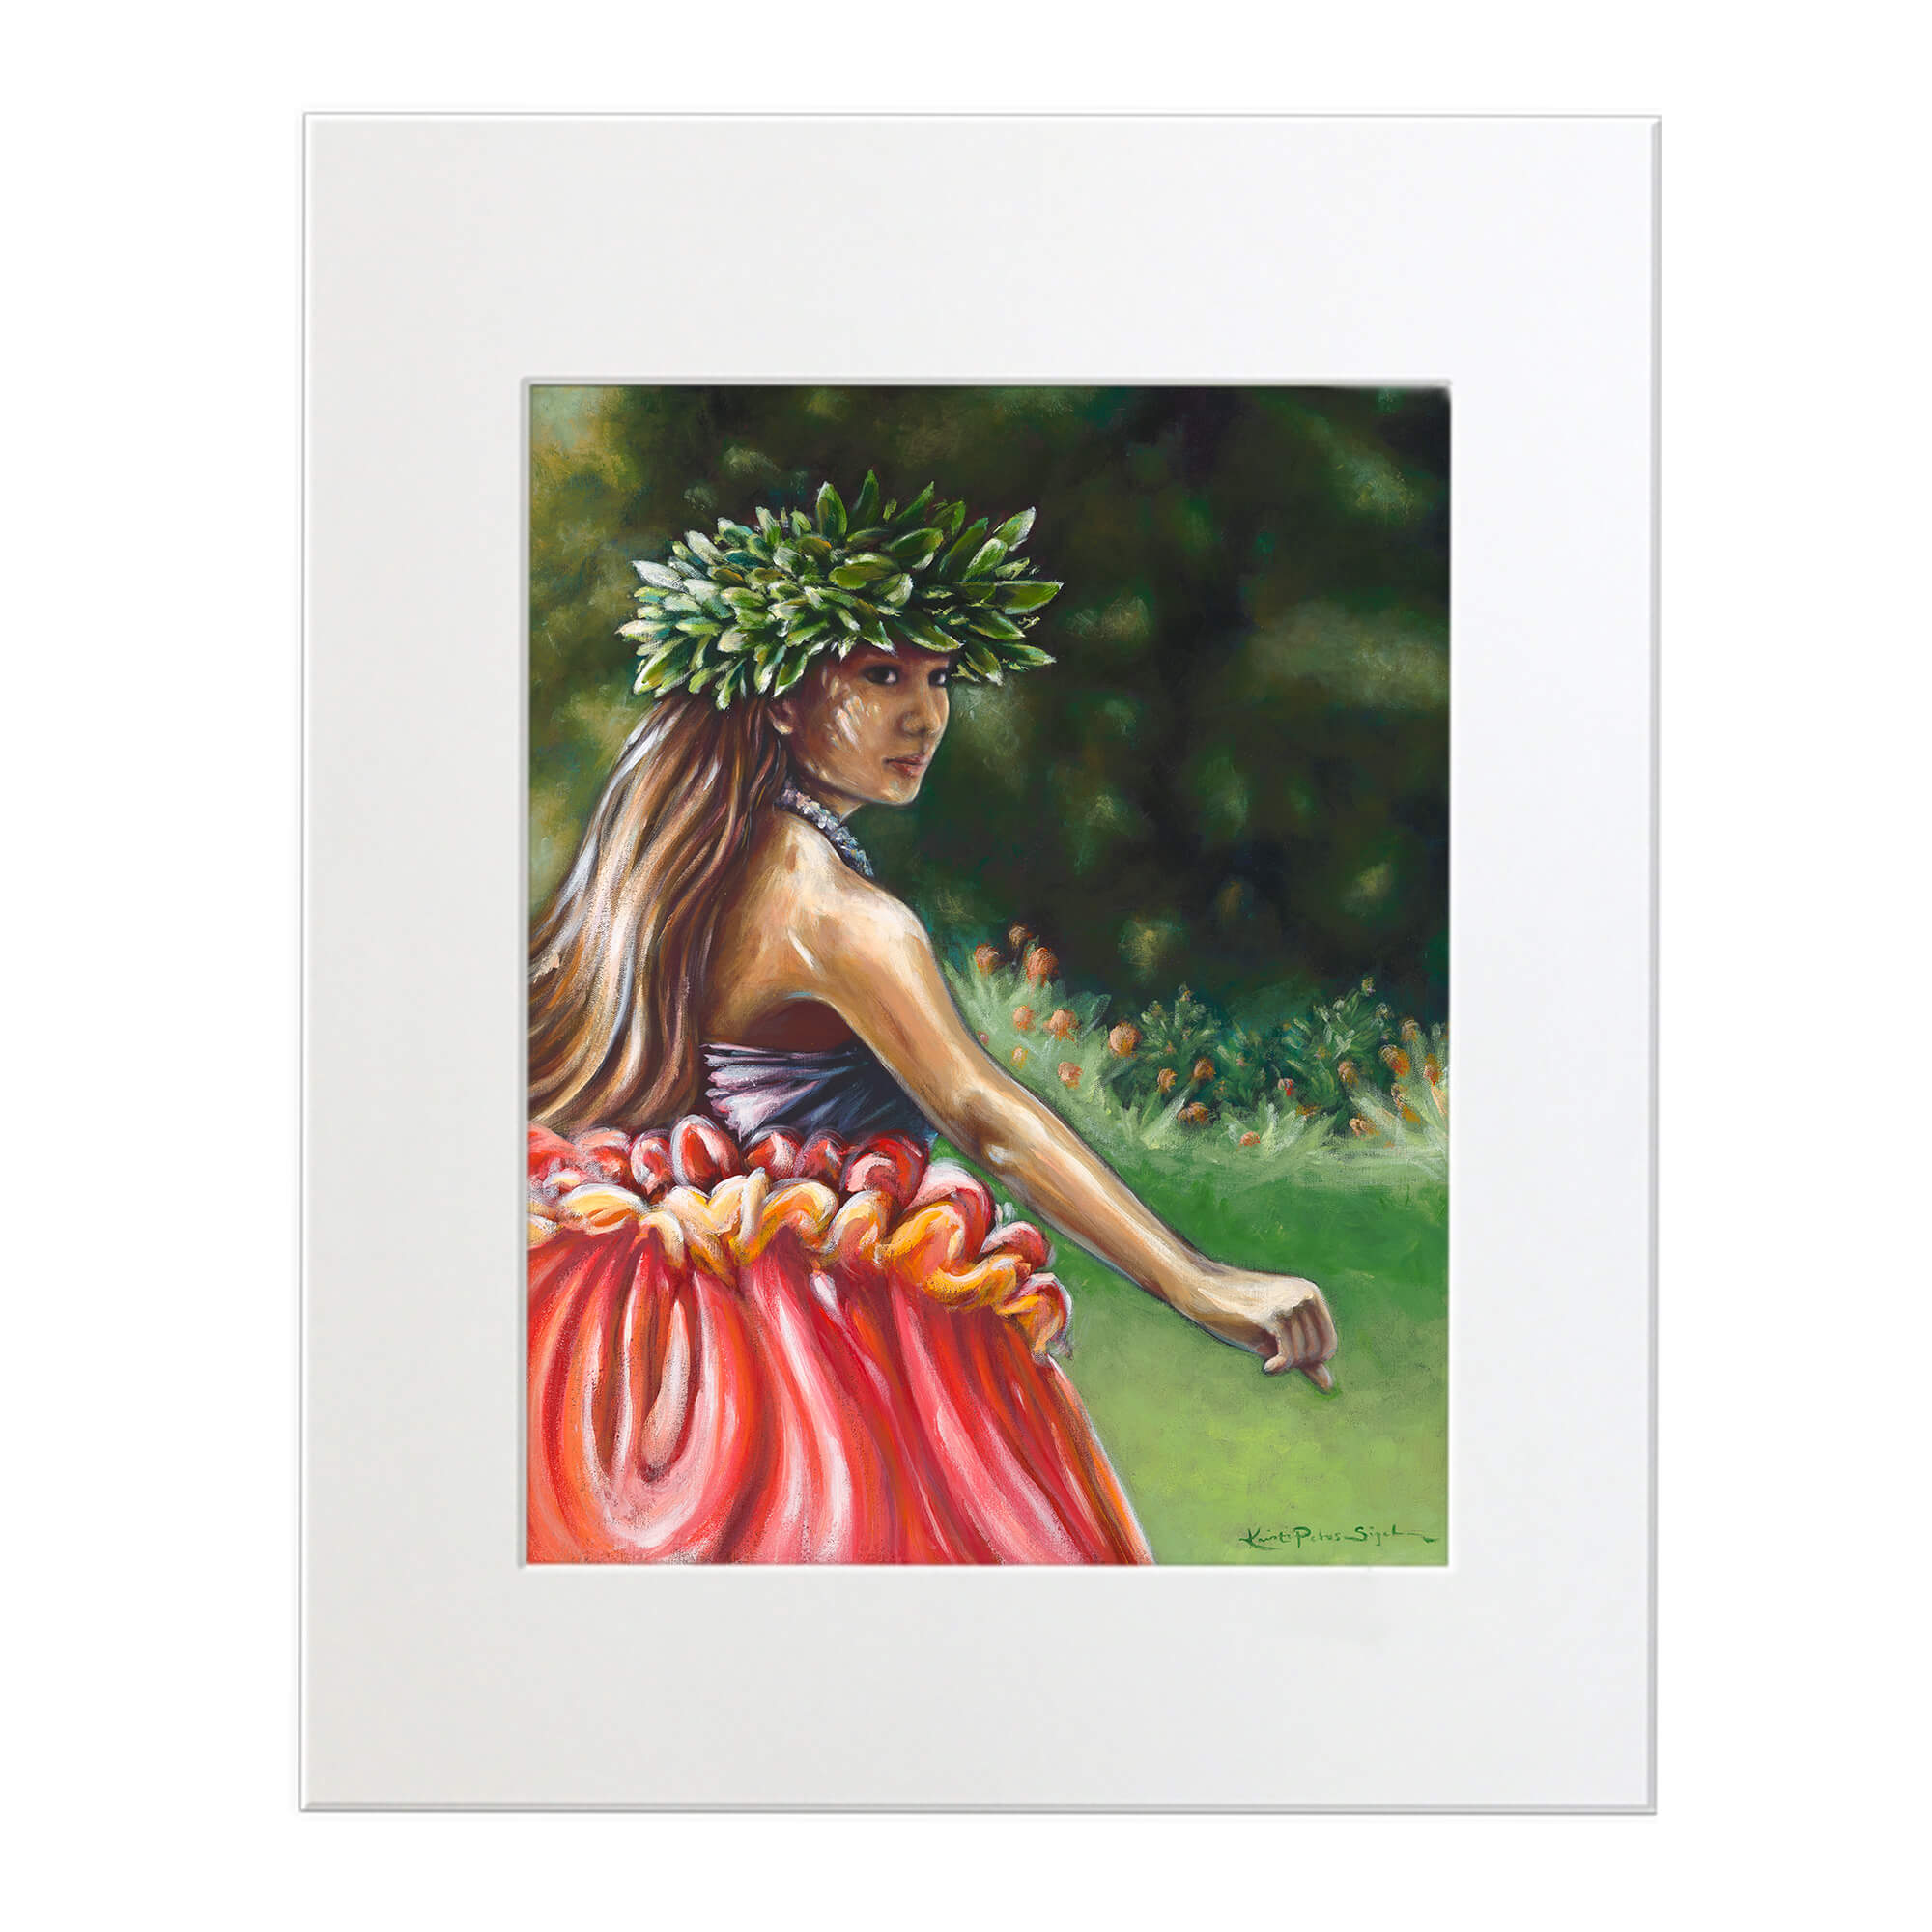 Mattted art print featuring a woman with brown hair  by hawaii artist Kristi Petosa